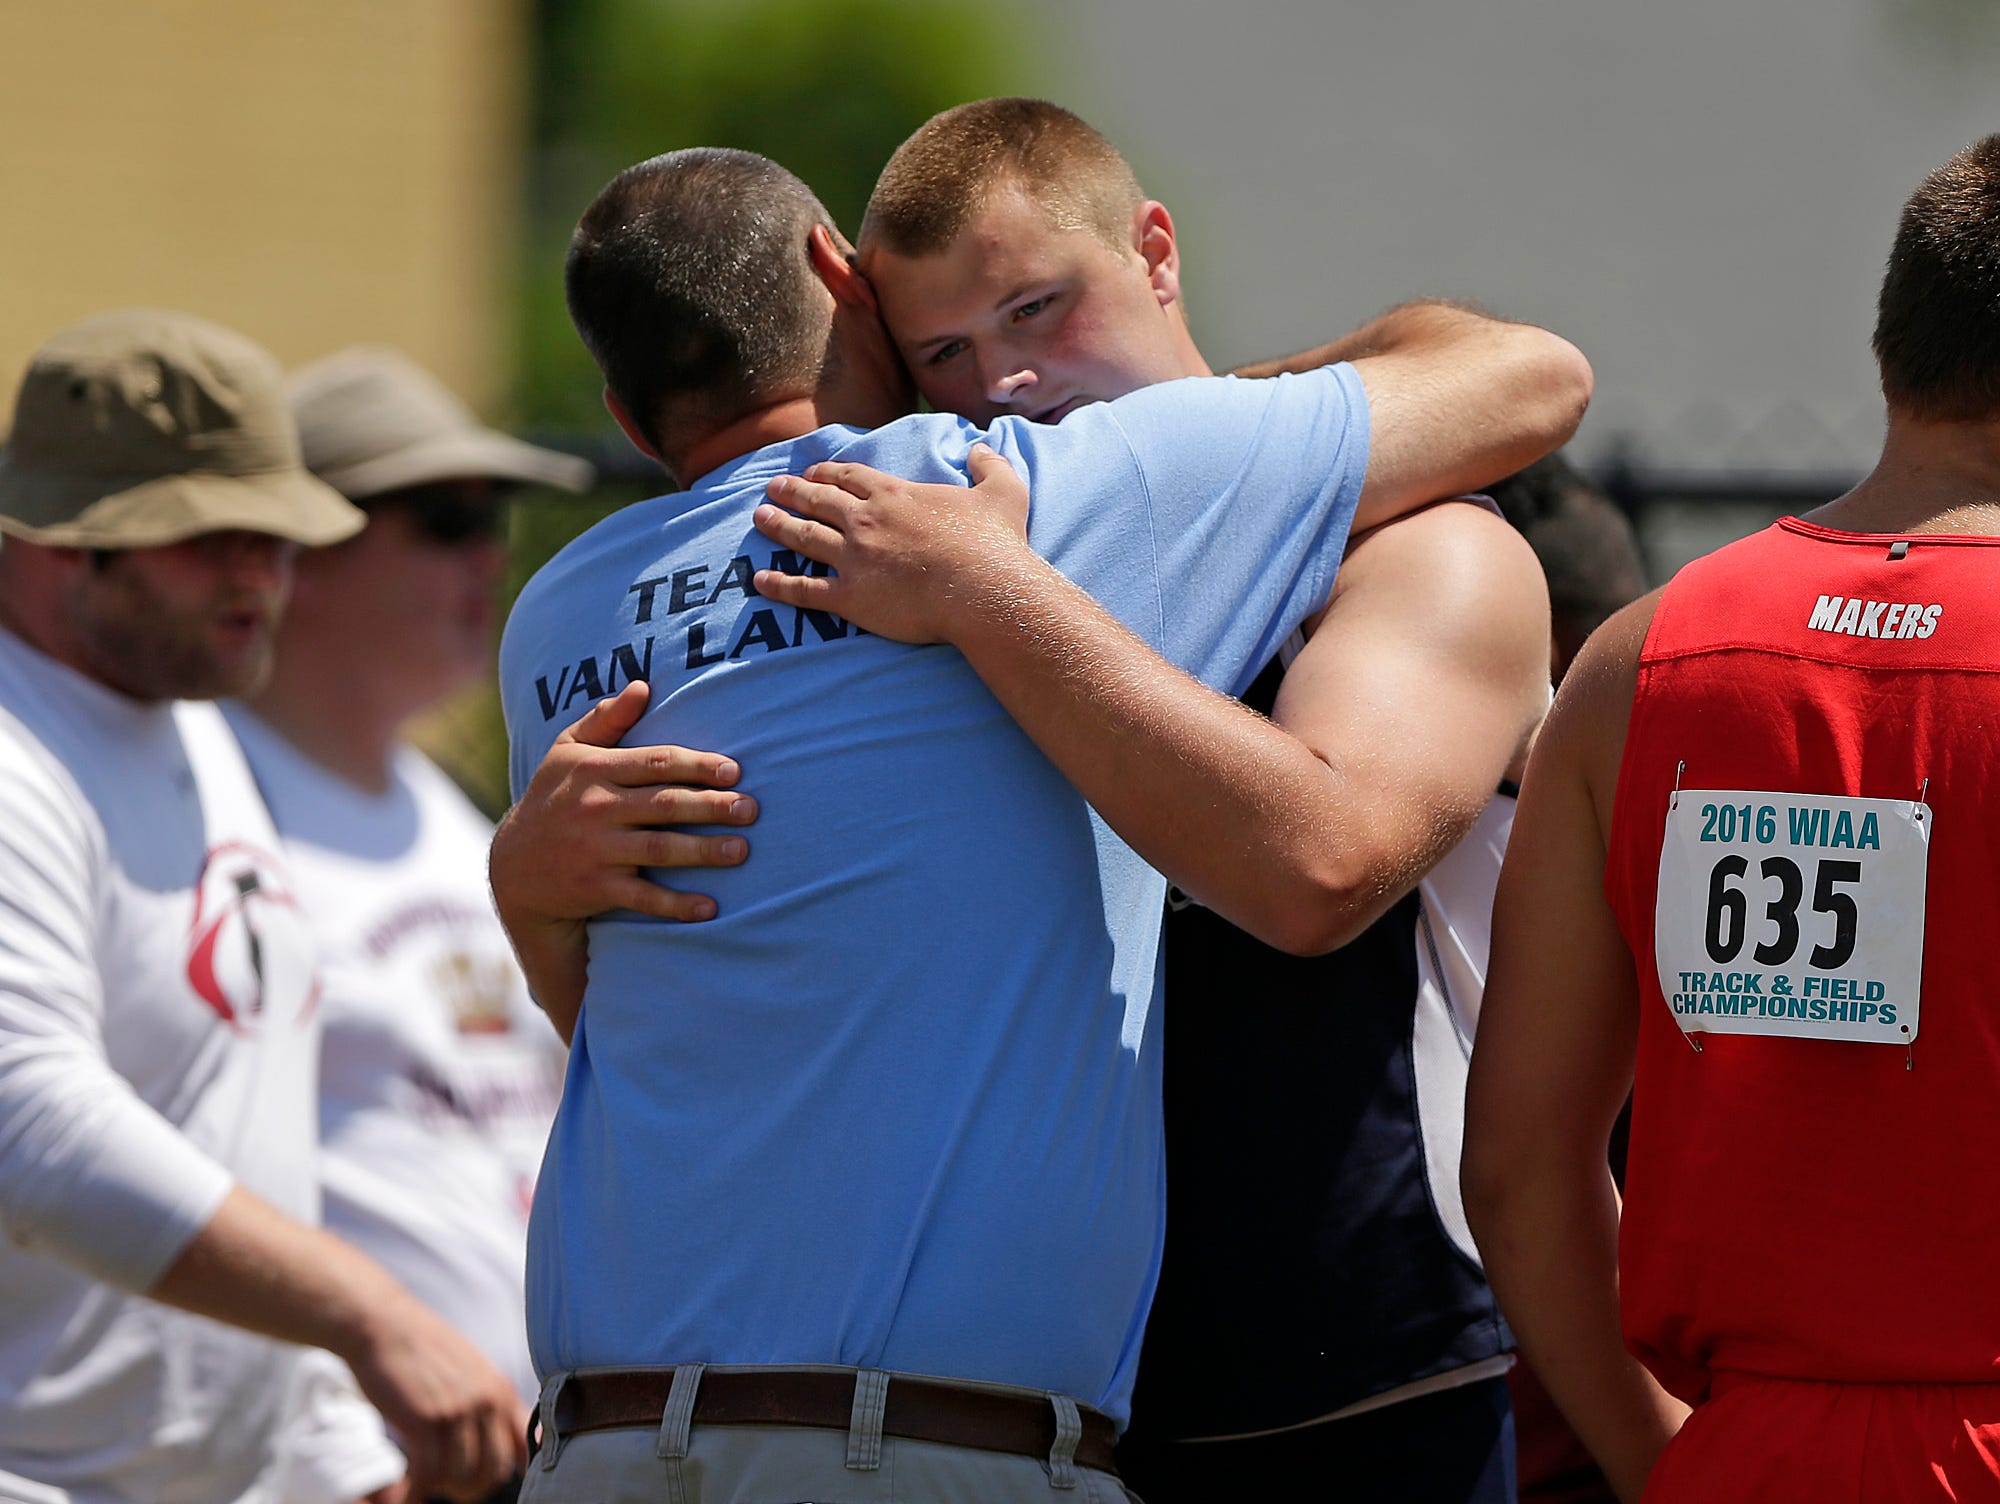 Bay Port's Cole Van Lanen gets a hug from his father, Tom, after winning the Division 1 shot put event during the WIAA state track and field meet at Veterans Memorial Field Sports Complex in La Crosse on June 3.